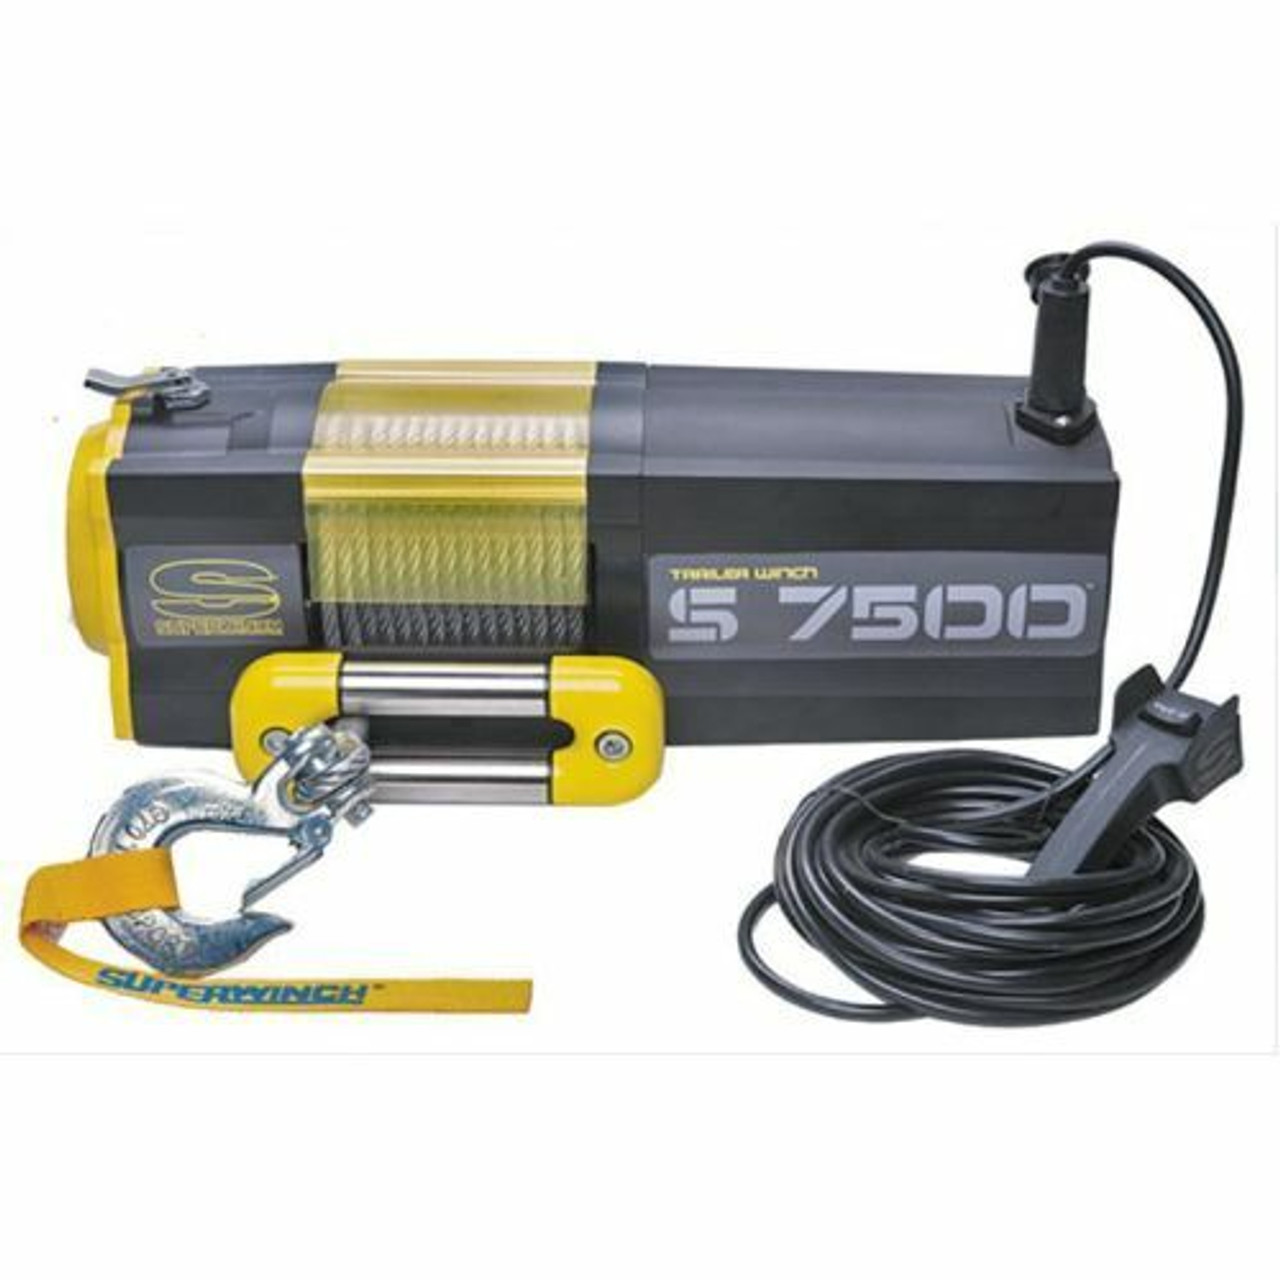 Superwinch 7500 LBS 12V DC 5/16in x 54ft Steel Rope S7500 Winch - 1475200